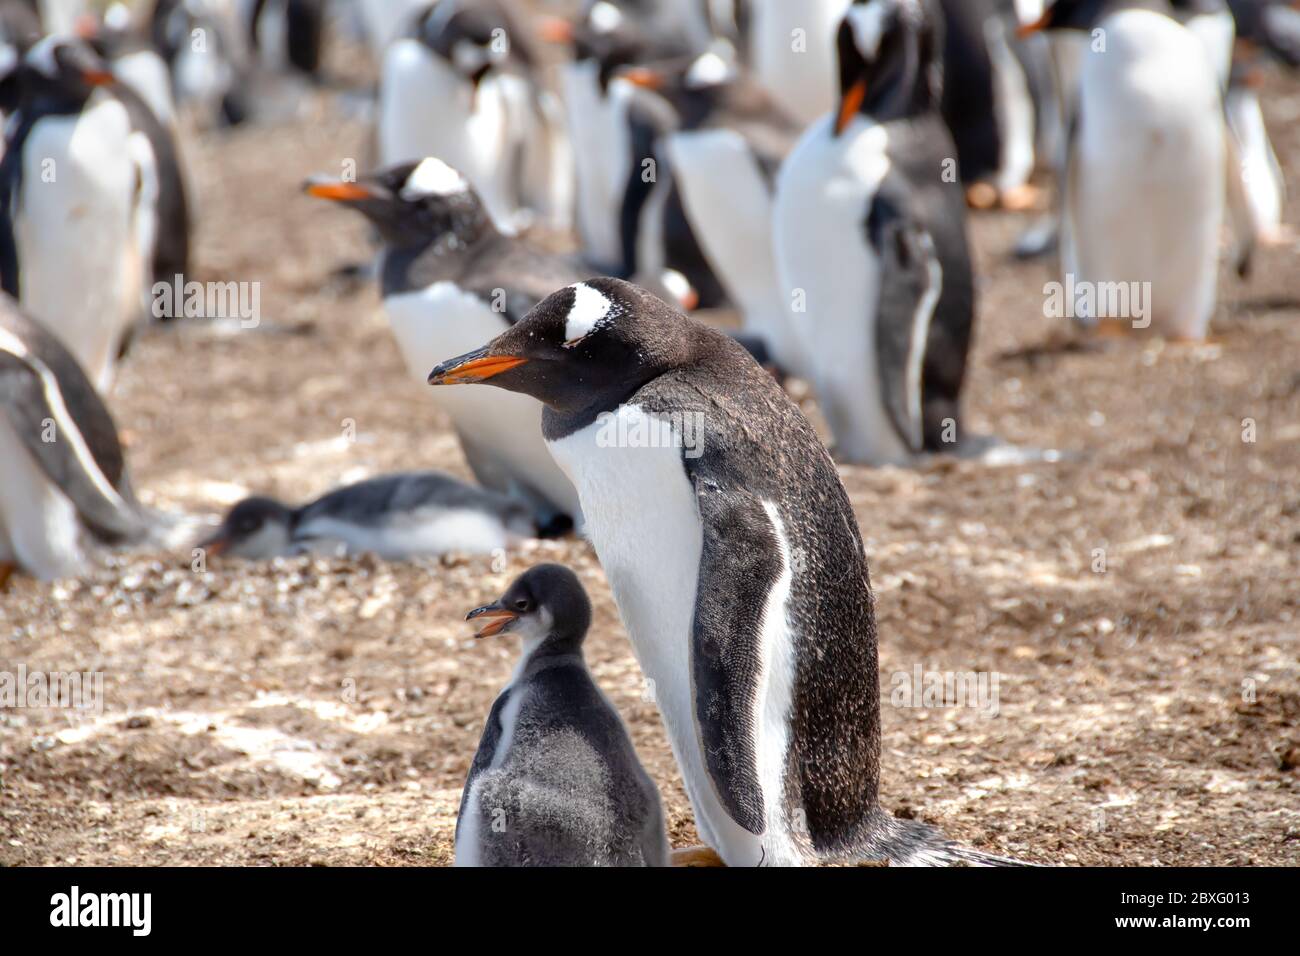 Gentoo Penguin and a chick with other Penguins in the background. A colony of Gentoo Penguins on a sunny day at Volunteer Point, Falkland Islands. Stock Photo